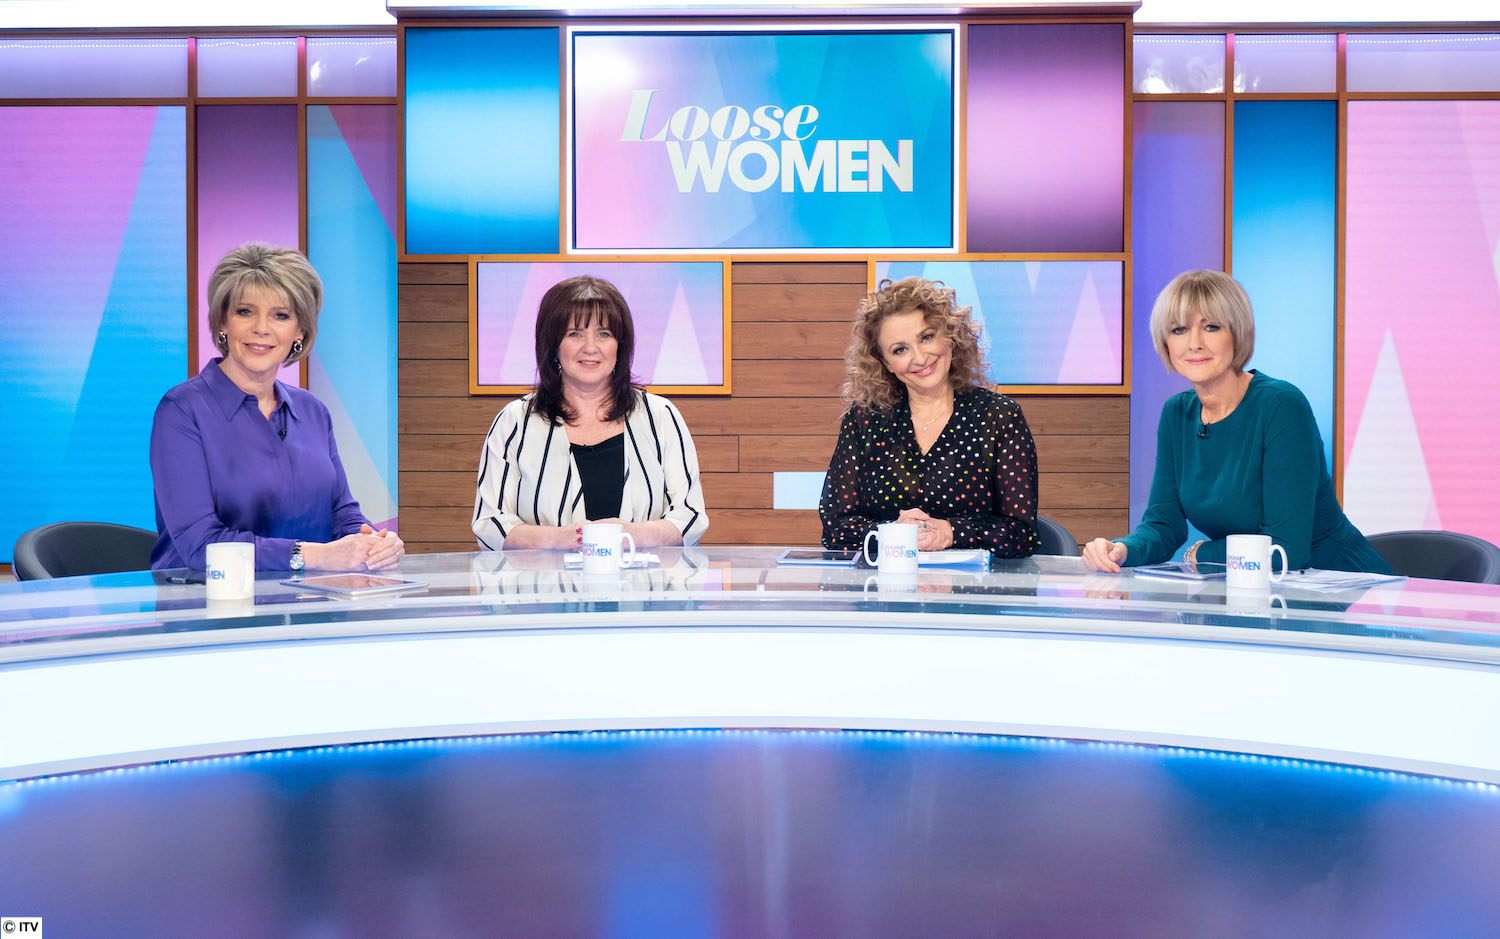 India Willoughby just pointed out something pretty crucial about ITV’s Loose Women